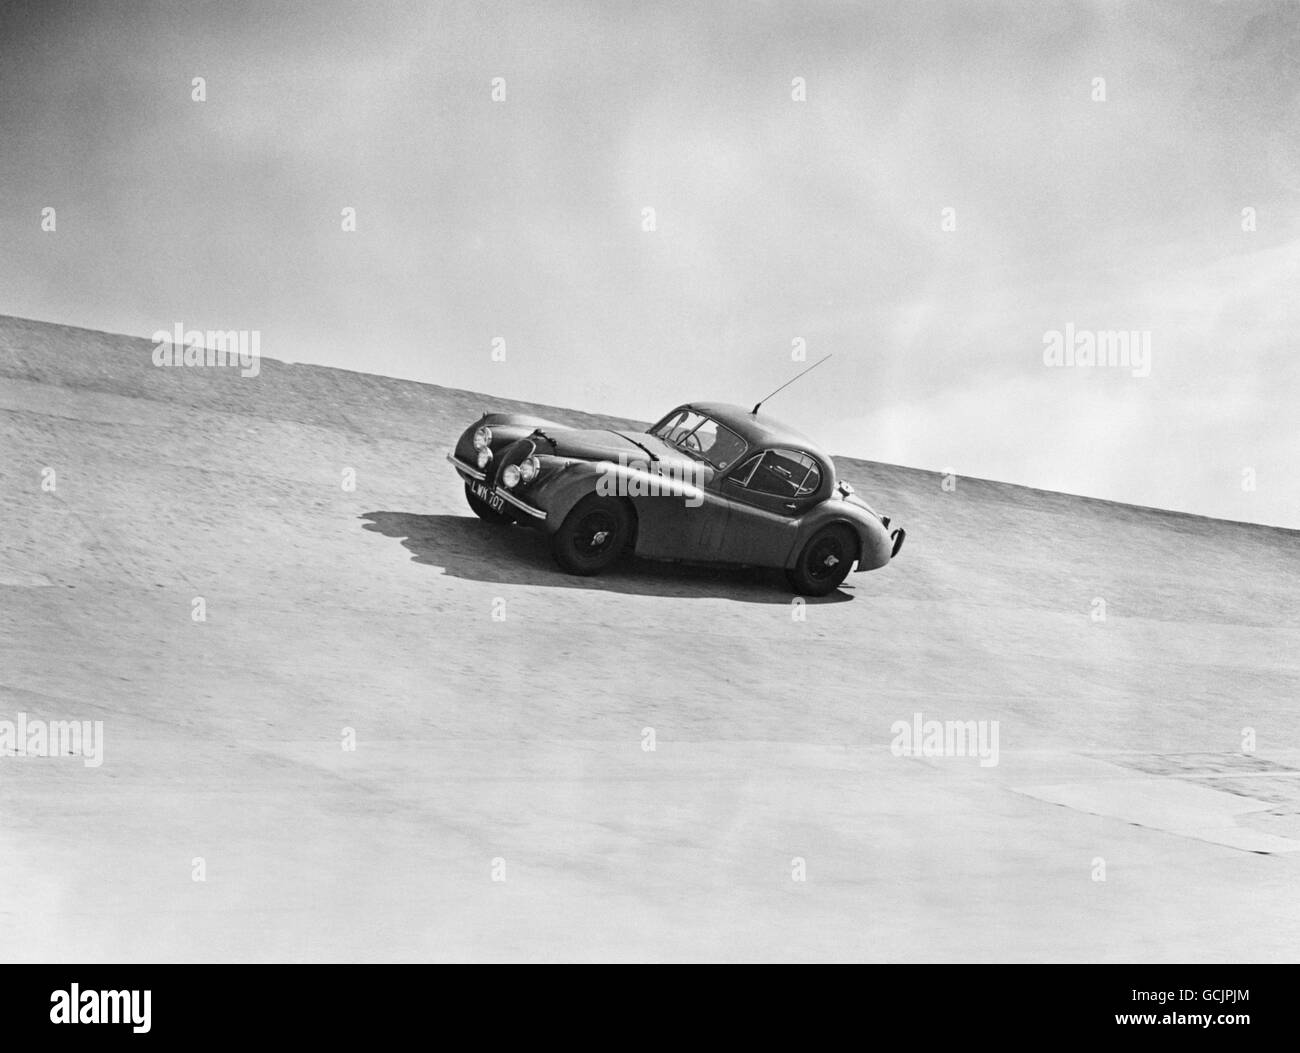 The XK 120 Jaguar, driven by Stirling Moss, speeds round the Montlhery track as he beats the world record at the 72nd hour race. At the wheel, driving in three hour shifts were Stirling Moss, Leslie Johnson, Herbert Hadley and Jack Fairman. Stock Photo